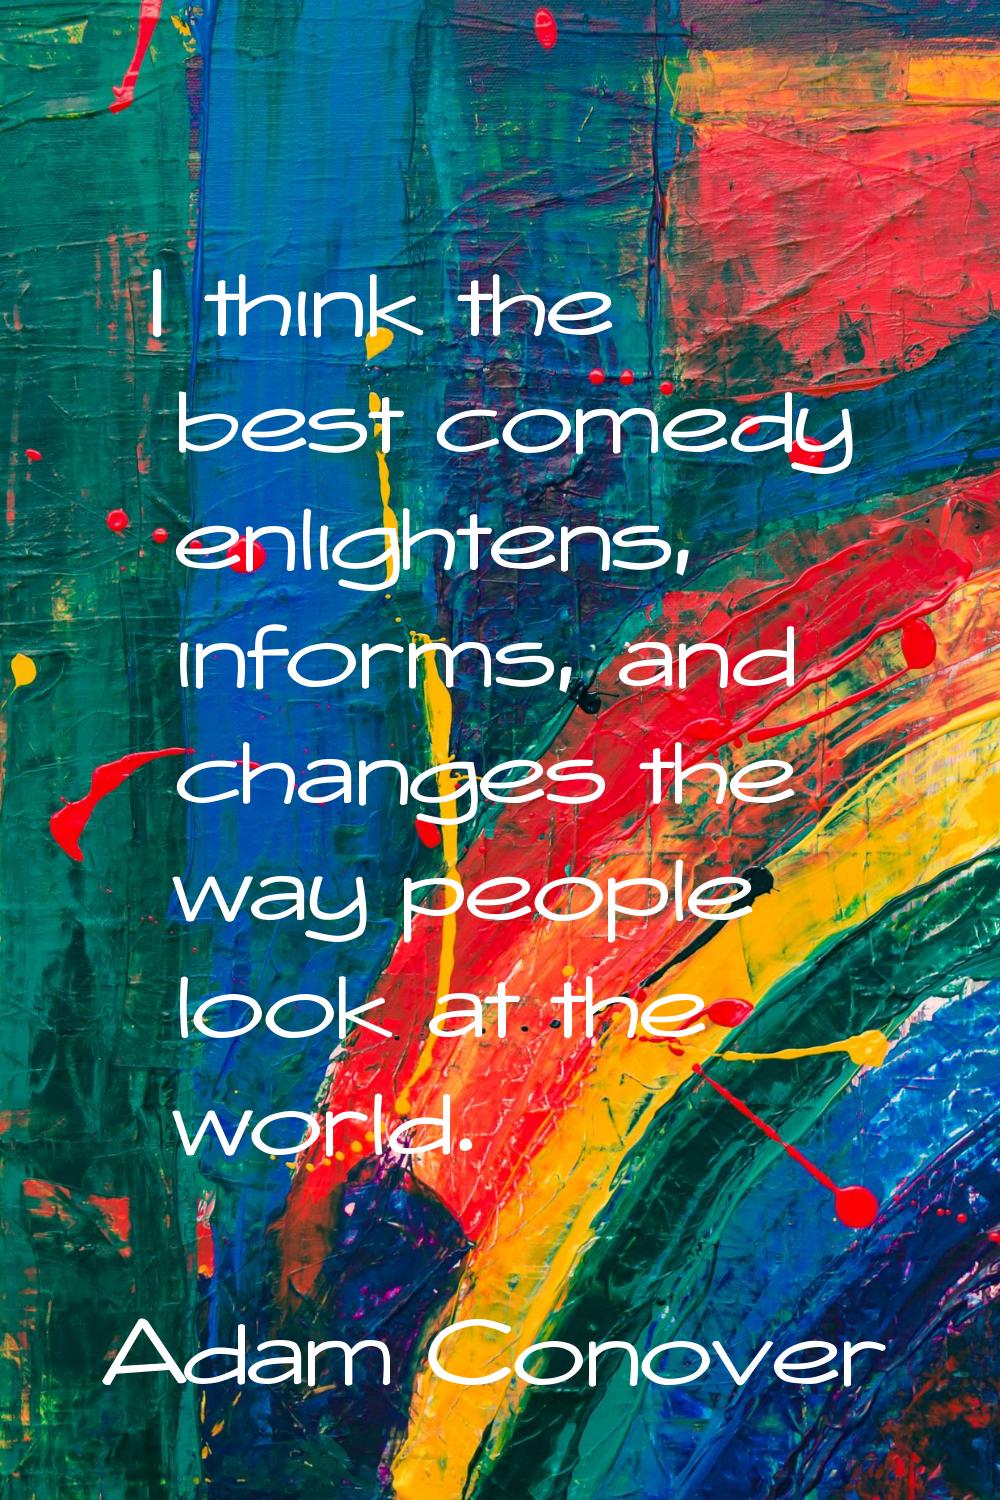 I think the best comedy enlightens, informs, and changes the way people look at the world.